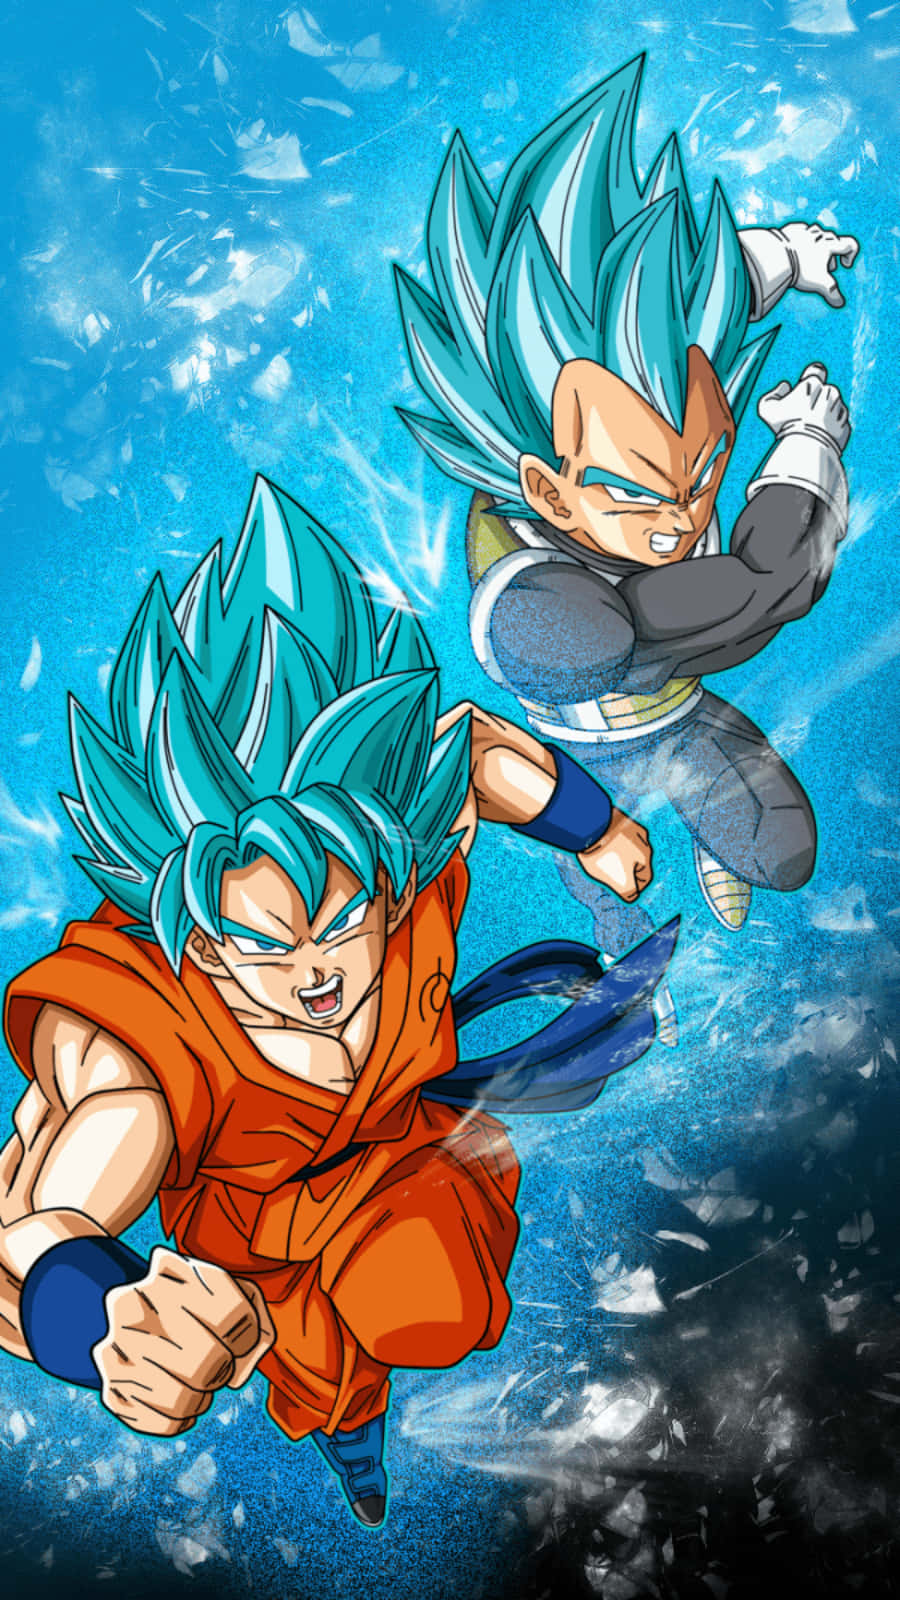 Unleash Your Power with the Dragon Ball Super iPhone Wallpaper